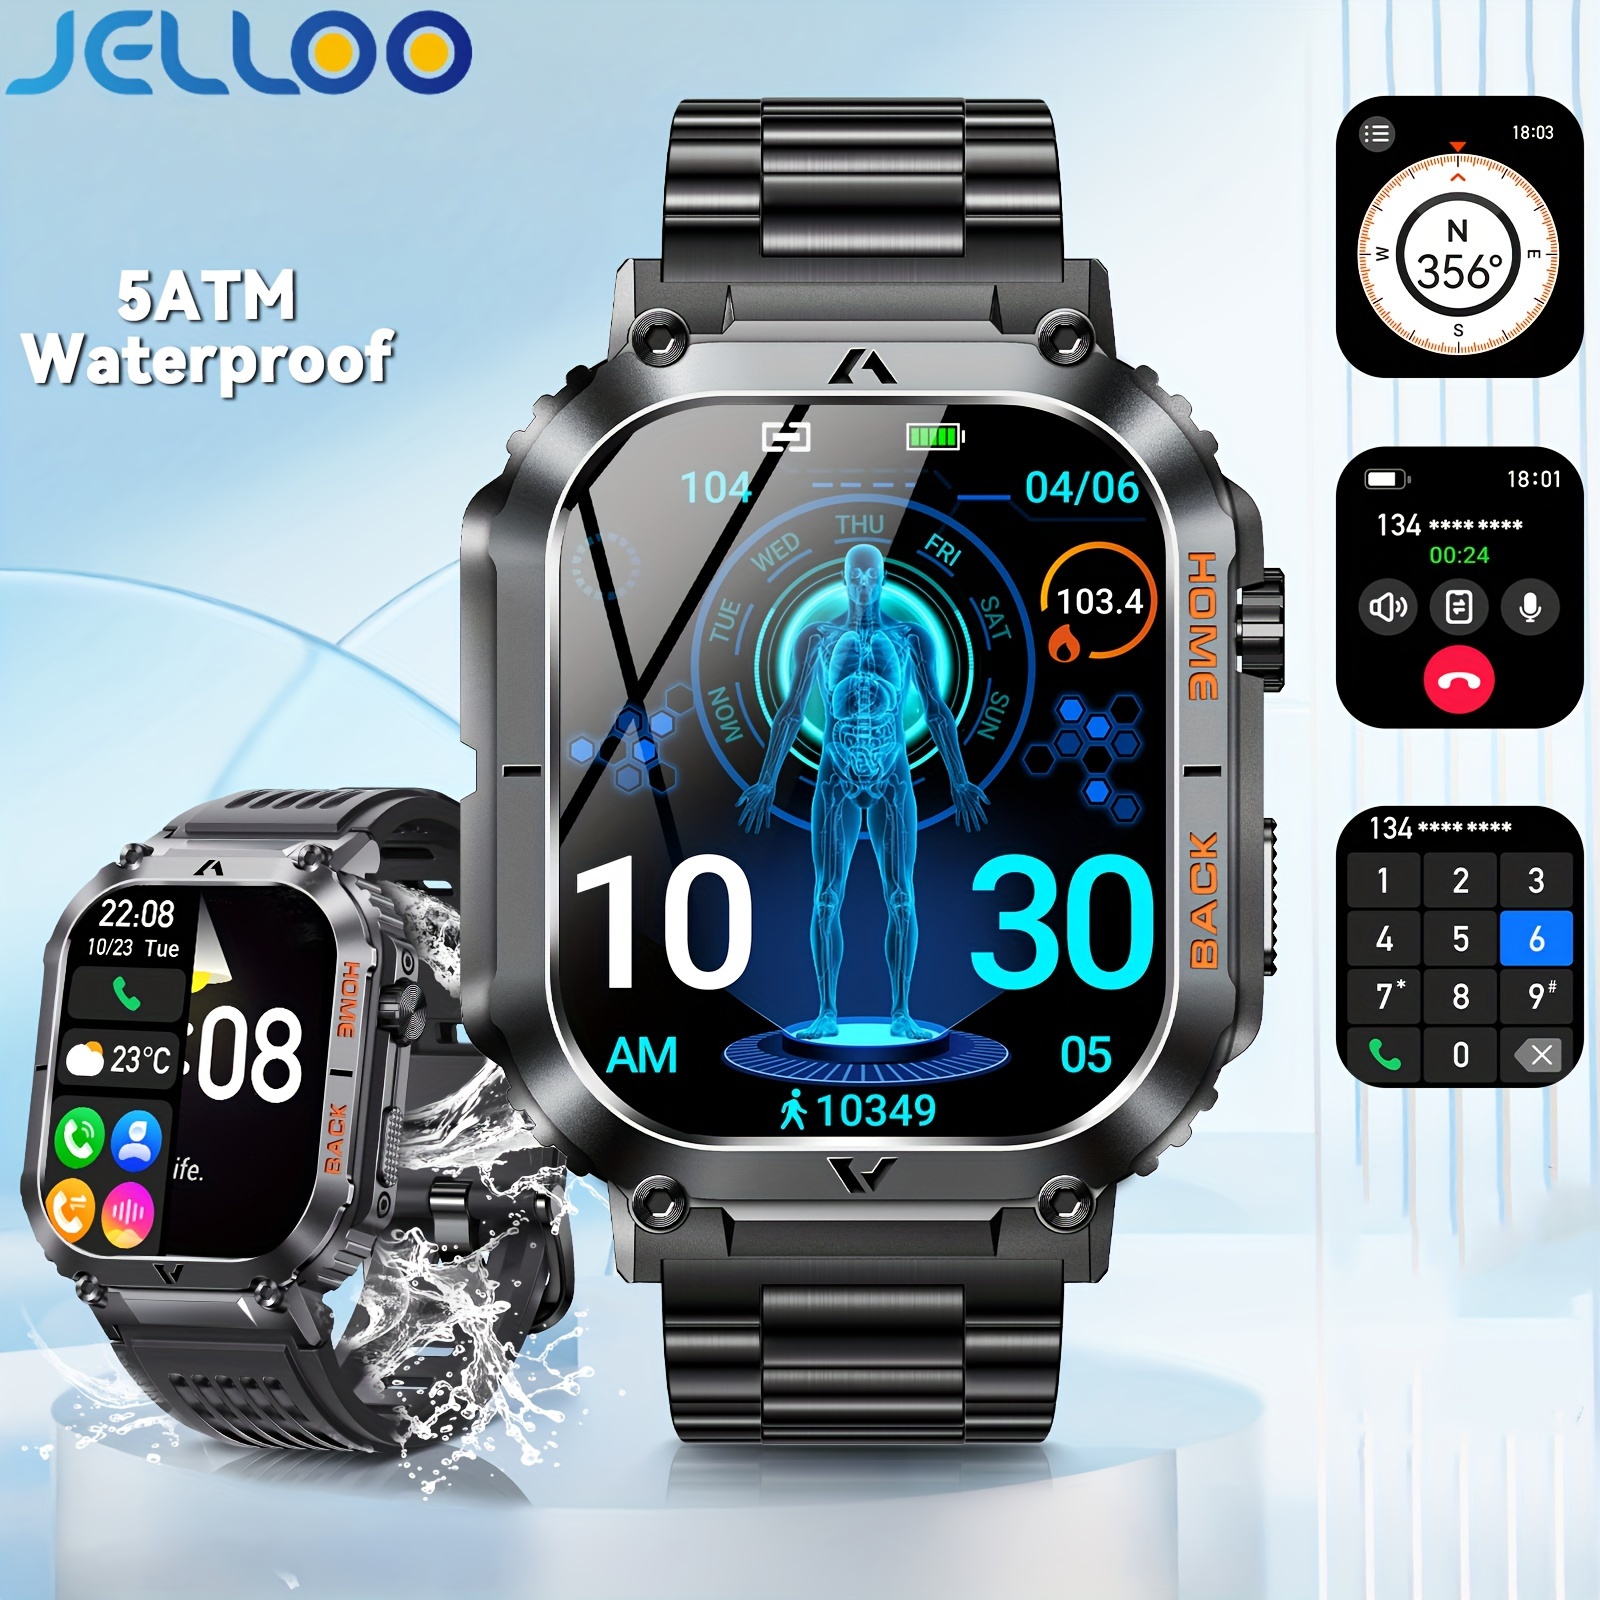 

Jelloo Ew5 Smart Watch For Men, With 2.02-inch Tft Hd Big Screen, Compass, Outdoor Always On Display Sports Men, With Wireless Calling Watch For Iphone And Android Watch